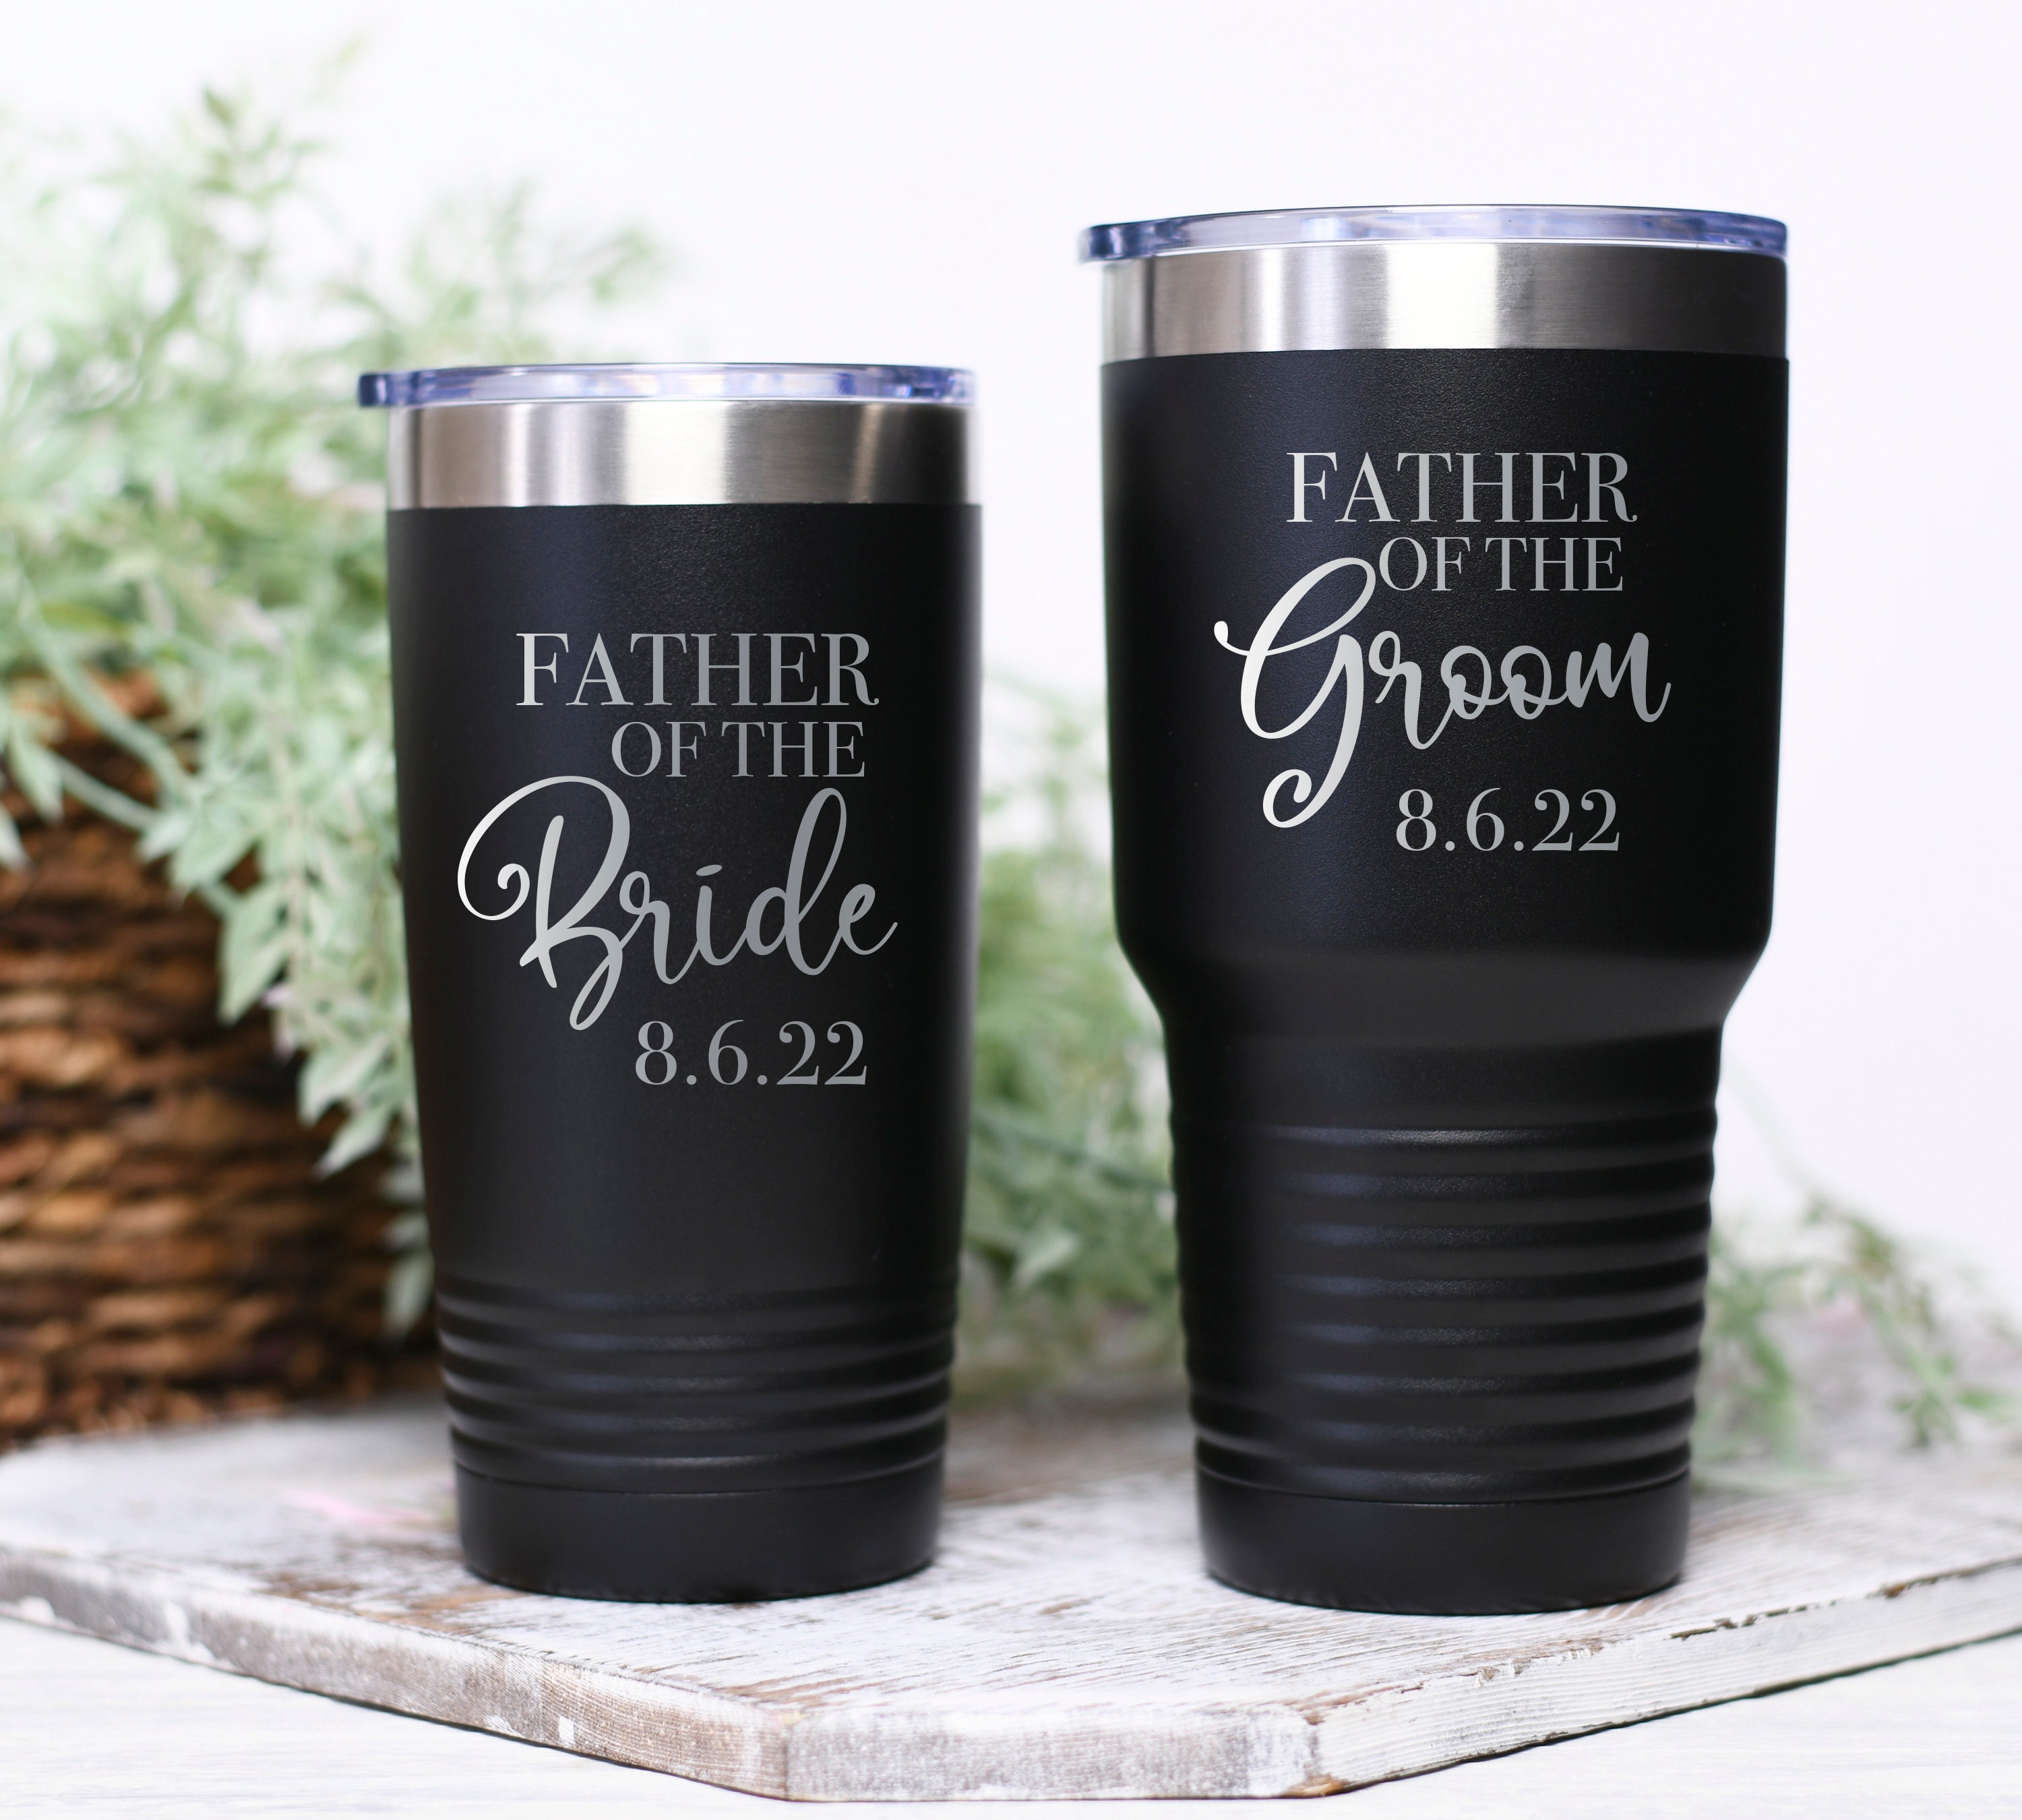 Sassycups Mother of The Bride Cup | Vacuum Insulated Stainless Steel Tumbler for Bride's Mom | Engagement Announcement | Travel Mug for Bride's